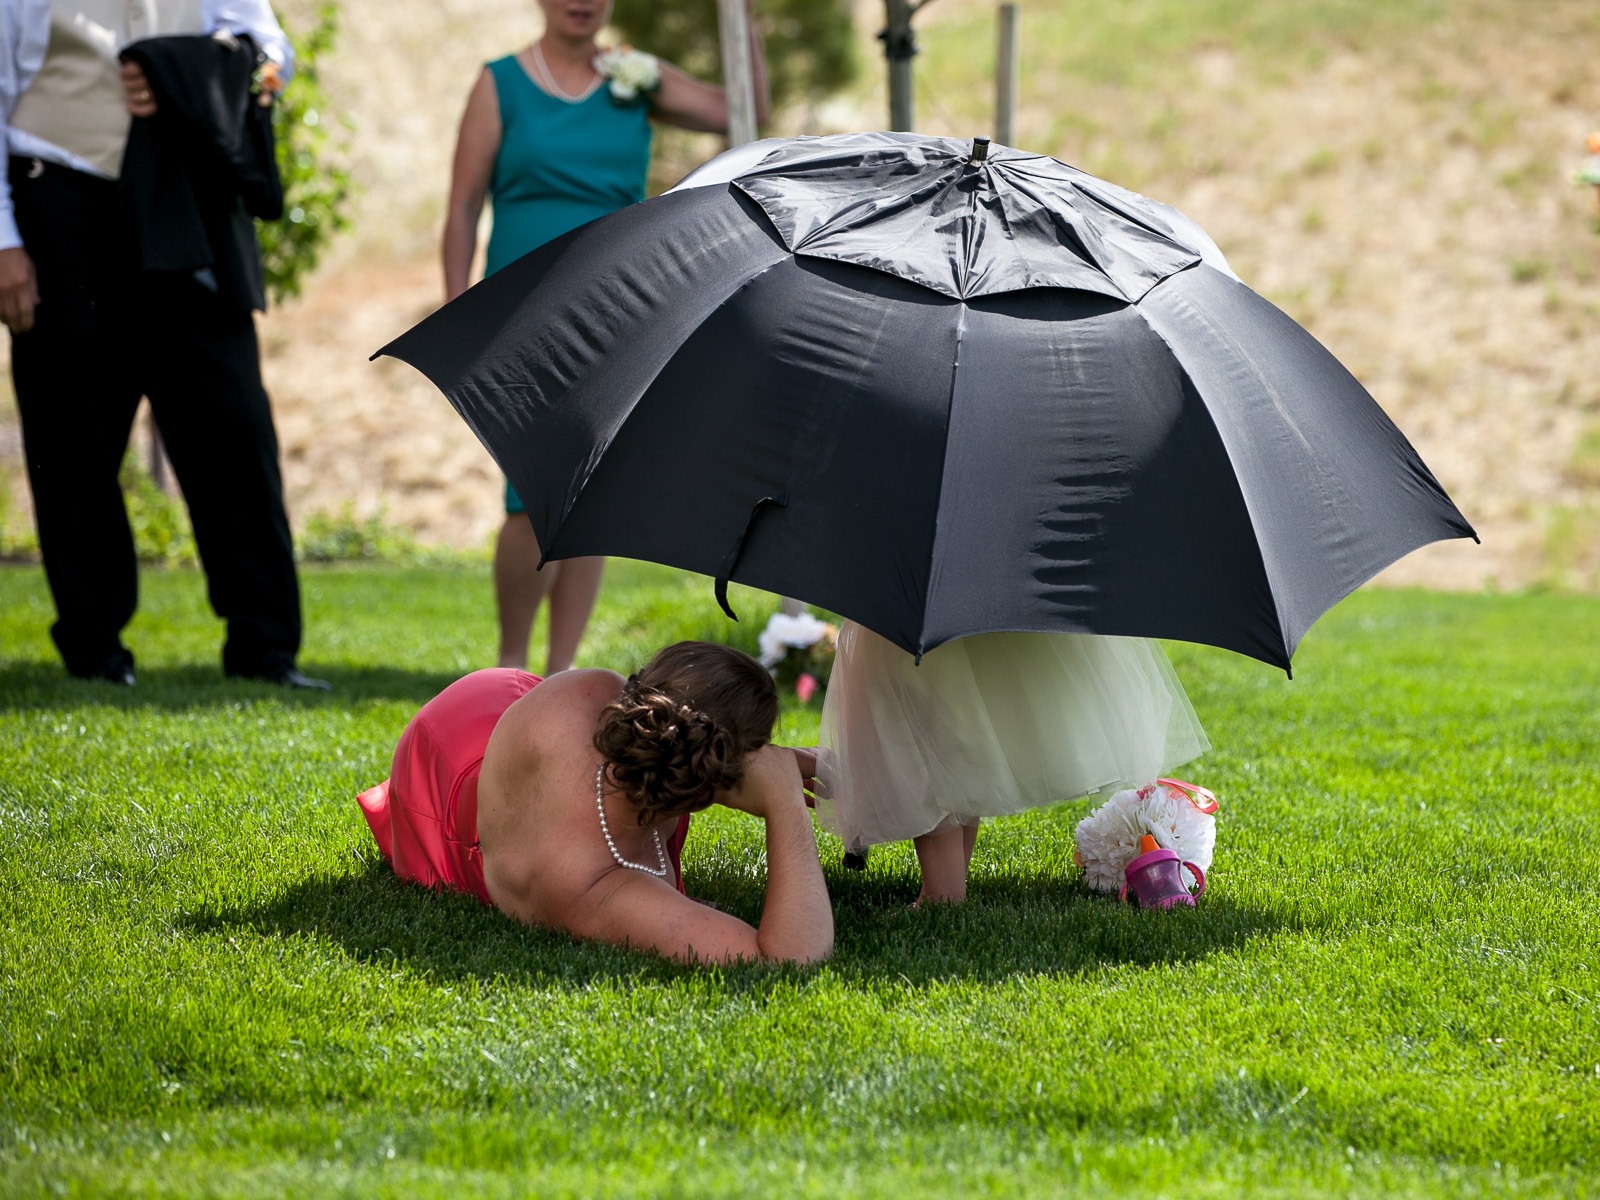 a flower girl stands under a black umbrella on a green lawn to escape the sun